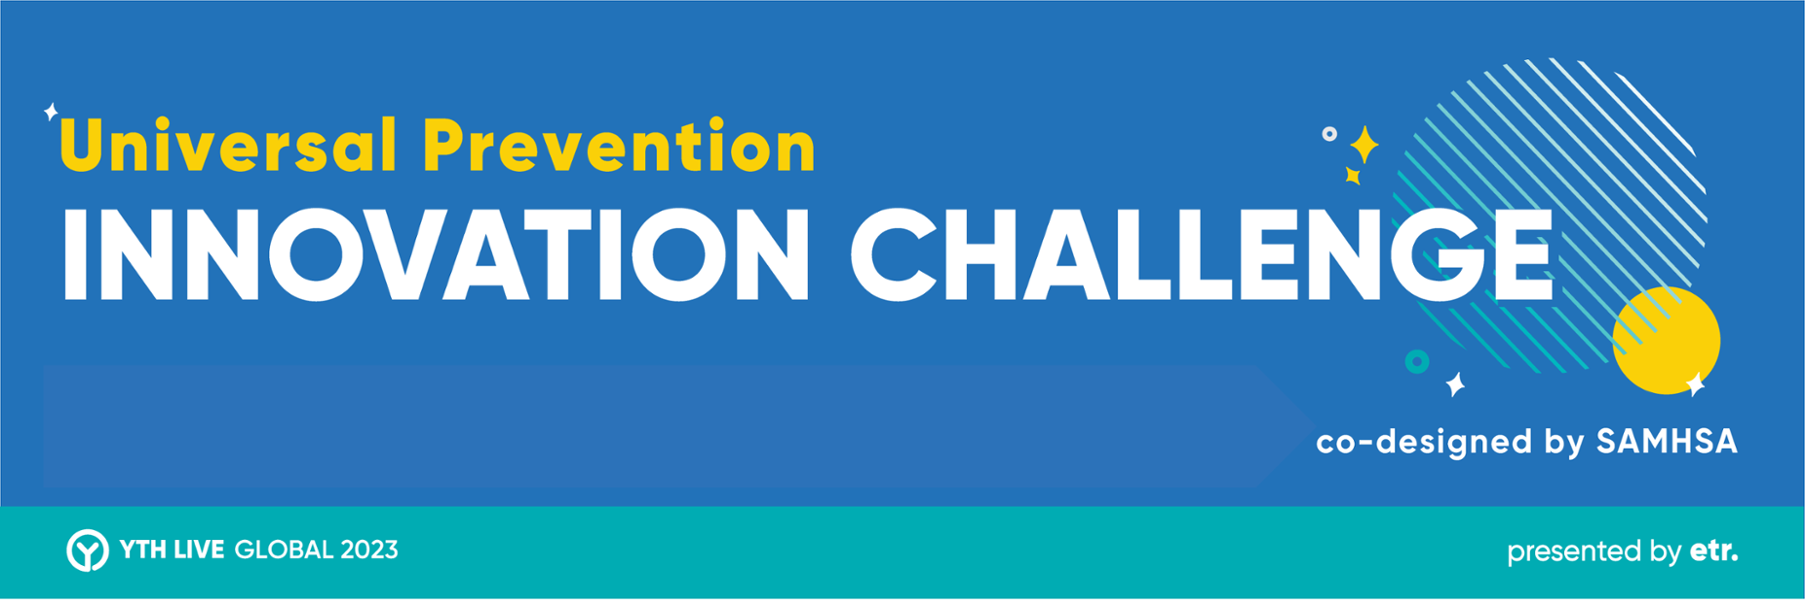 Universal Prevention Innovation Challenge, Co-designed by SAMHSA - See Winners banner